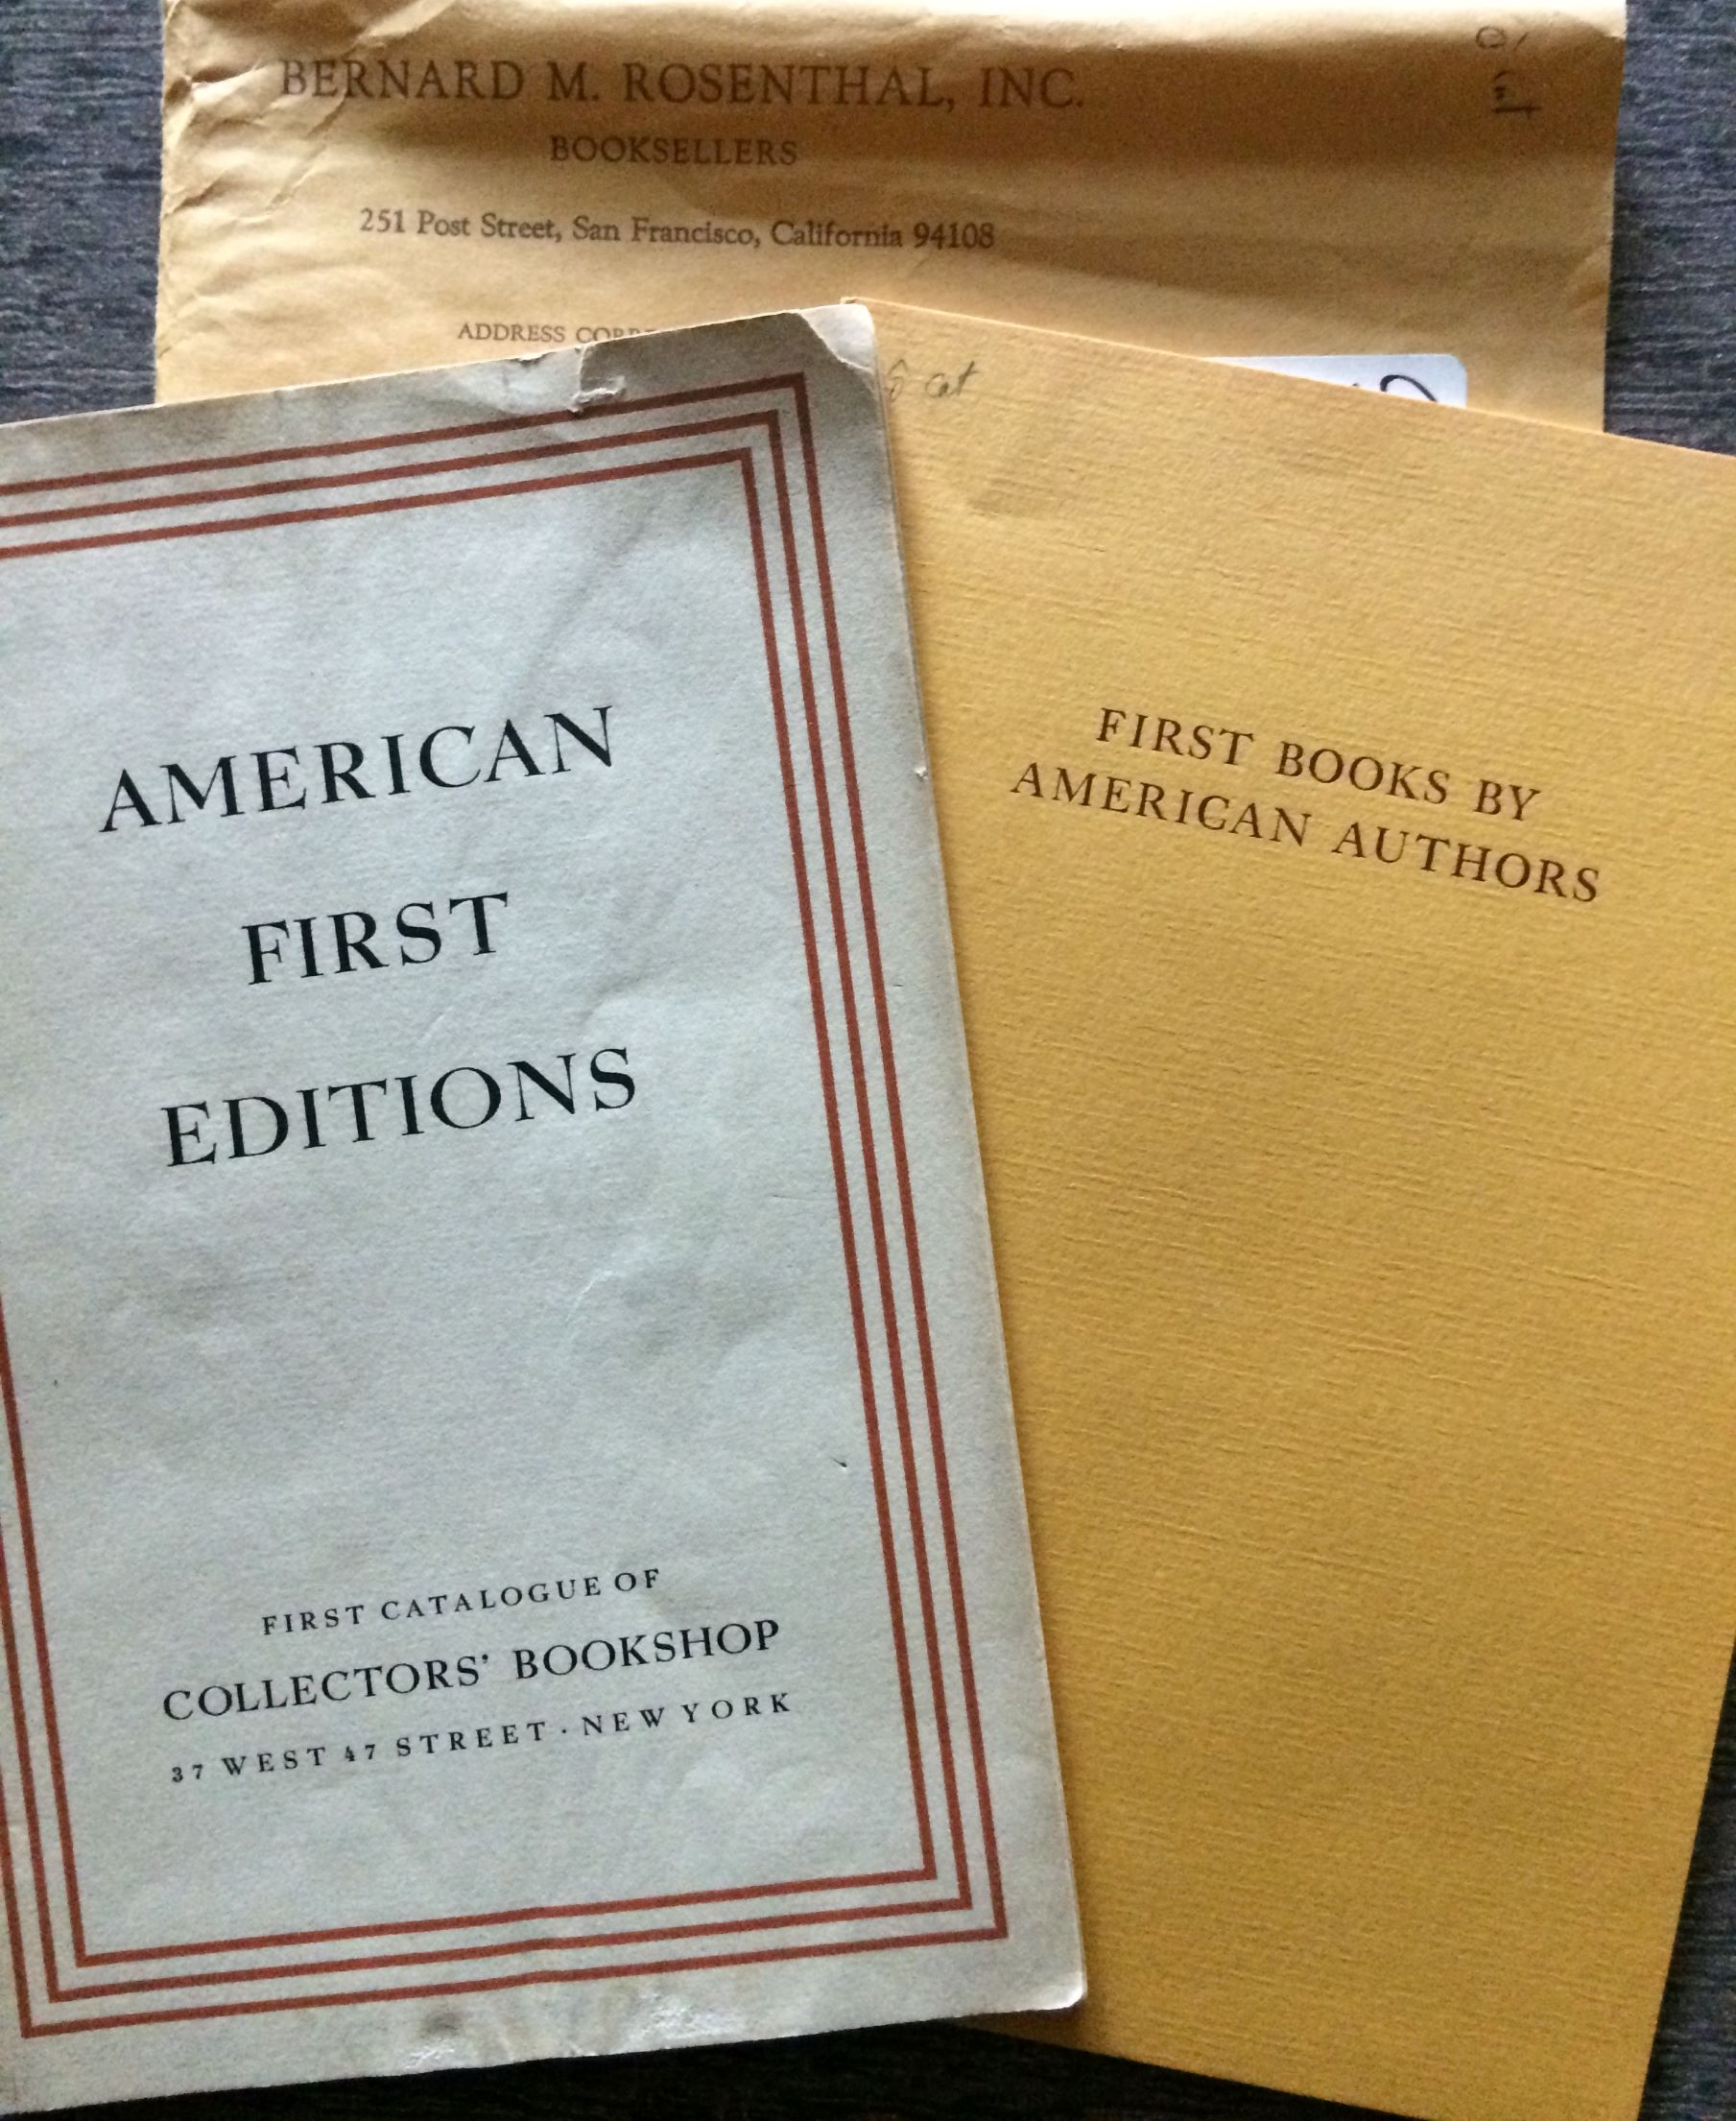 Image for (Two Items) American First Editions, First Catalogue of Collector's Bookshop, together with First Books by American Authors, an exhibition in memory of John S. Van E. Kohn (1906 - 1976), Williams College class of 1928, presented by Chapin Library, William